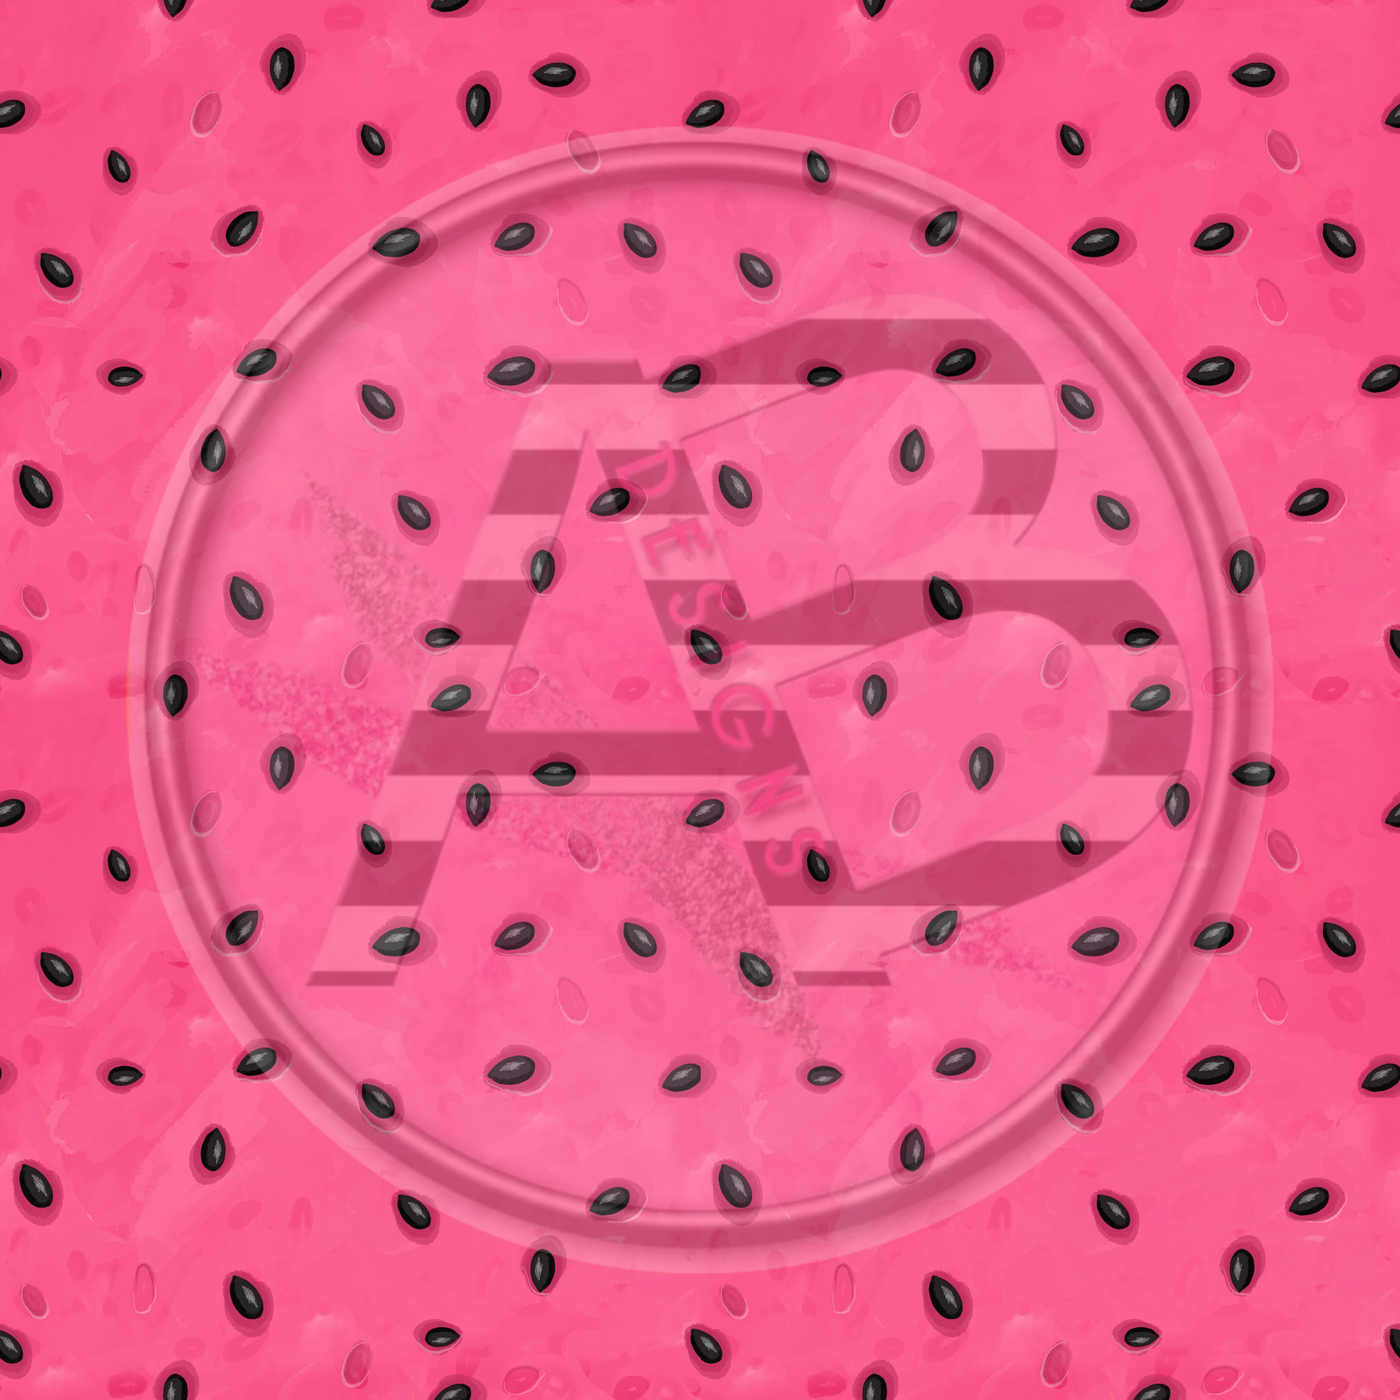 Adhesive Patterned Vinyl - Watermelon 6 Smaller